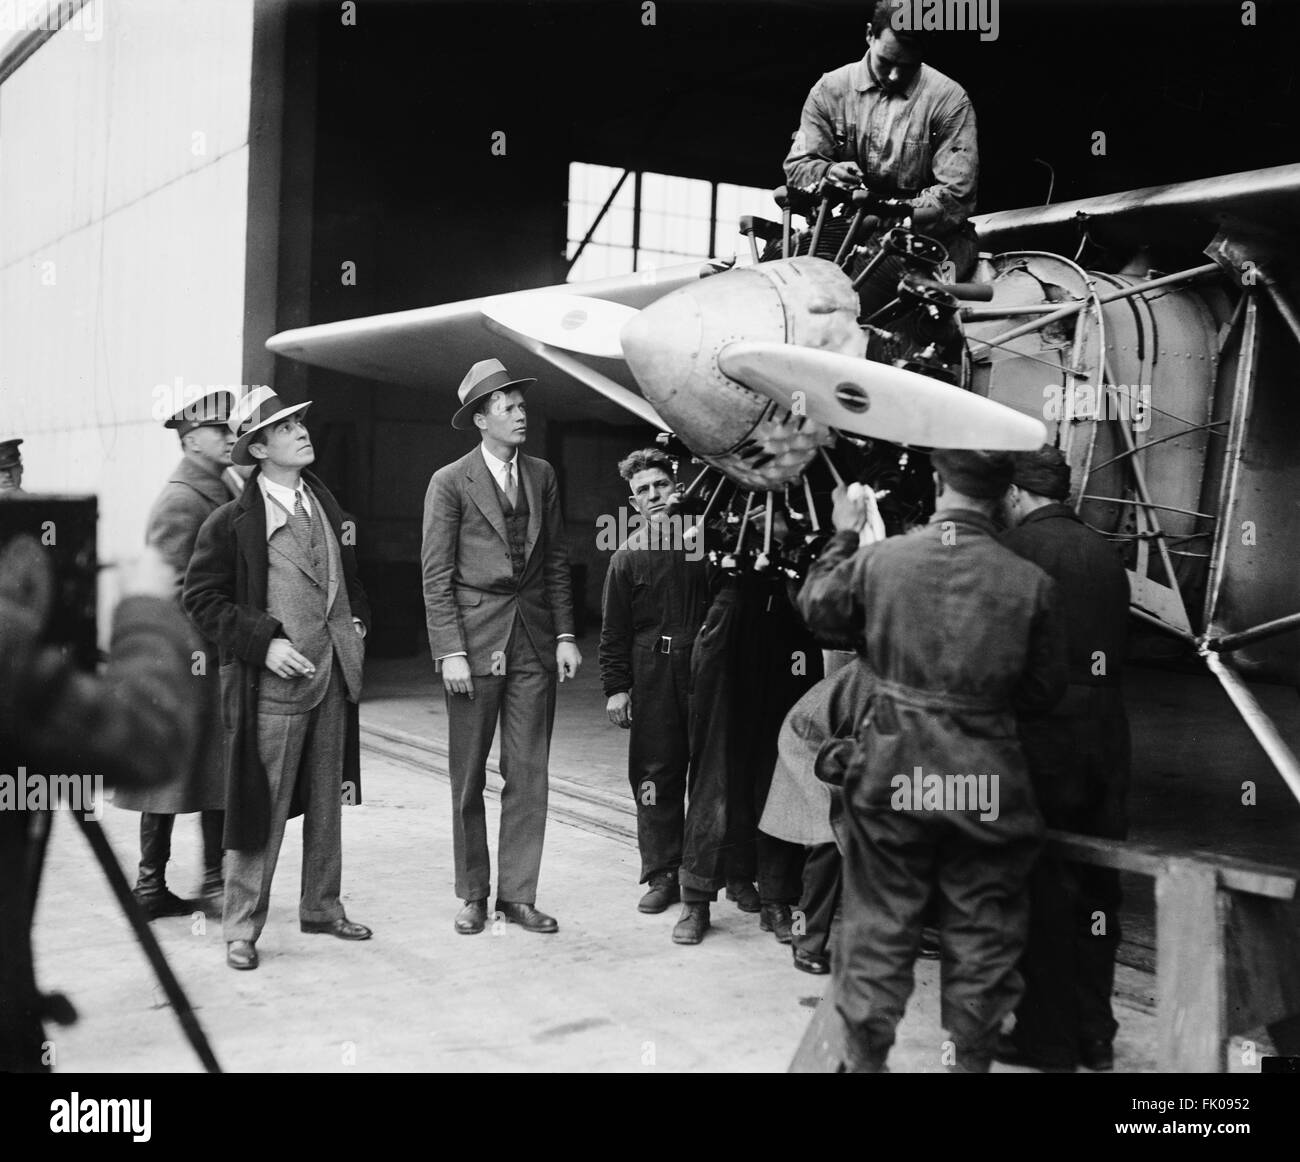 Charles Lindbergh and Group of Men with Airplane, Spirit of St. Louis, circa 1927.jpg Stock Photo